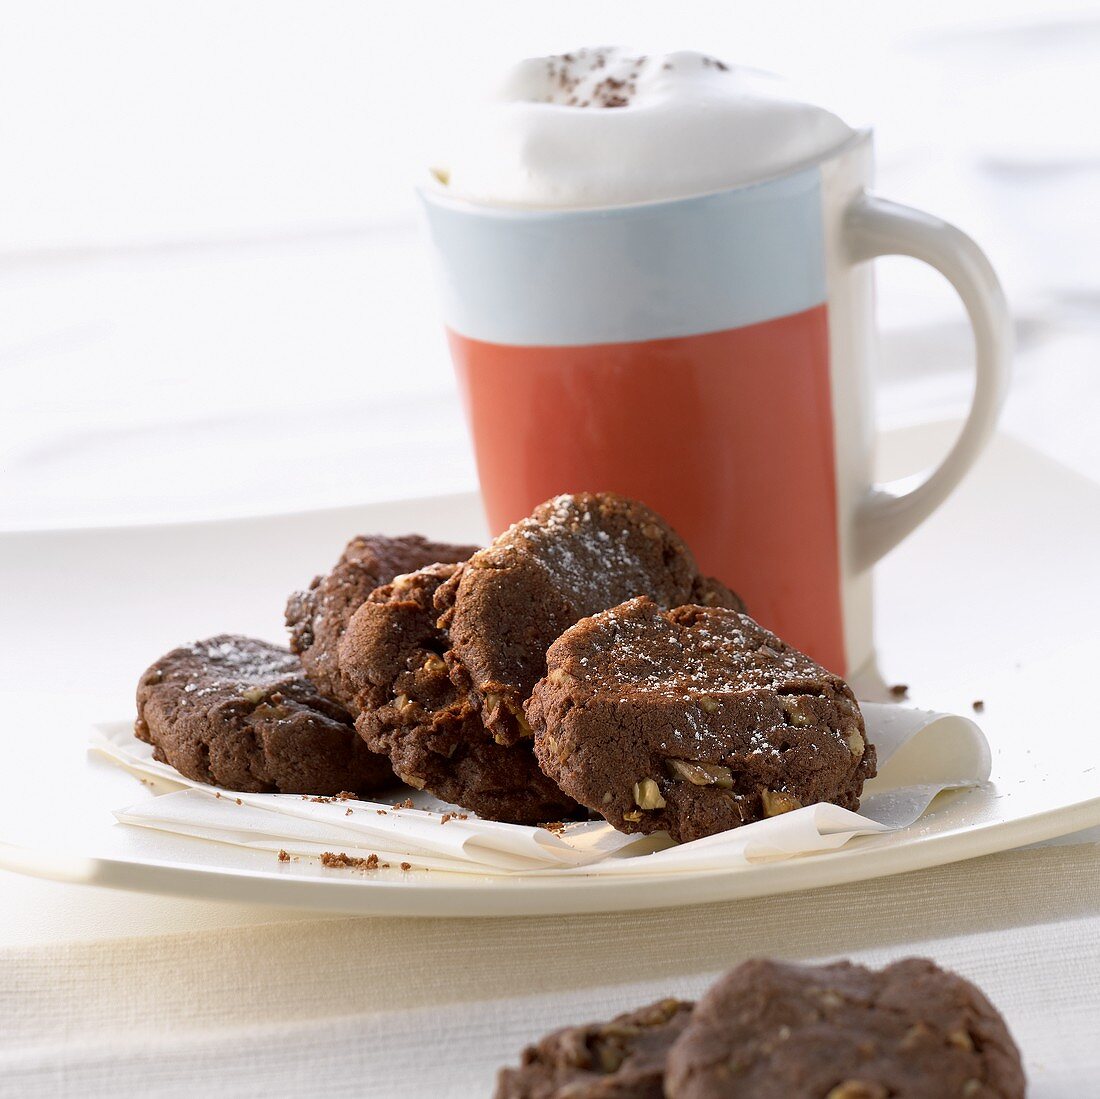 Chocolate biscuits with walnuts